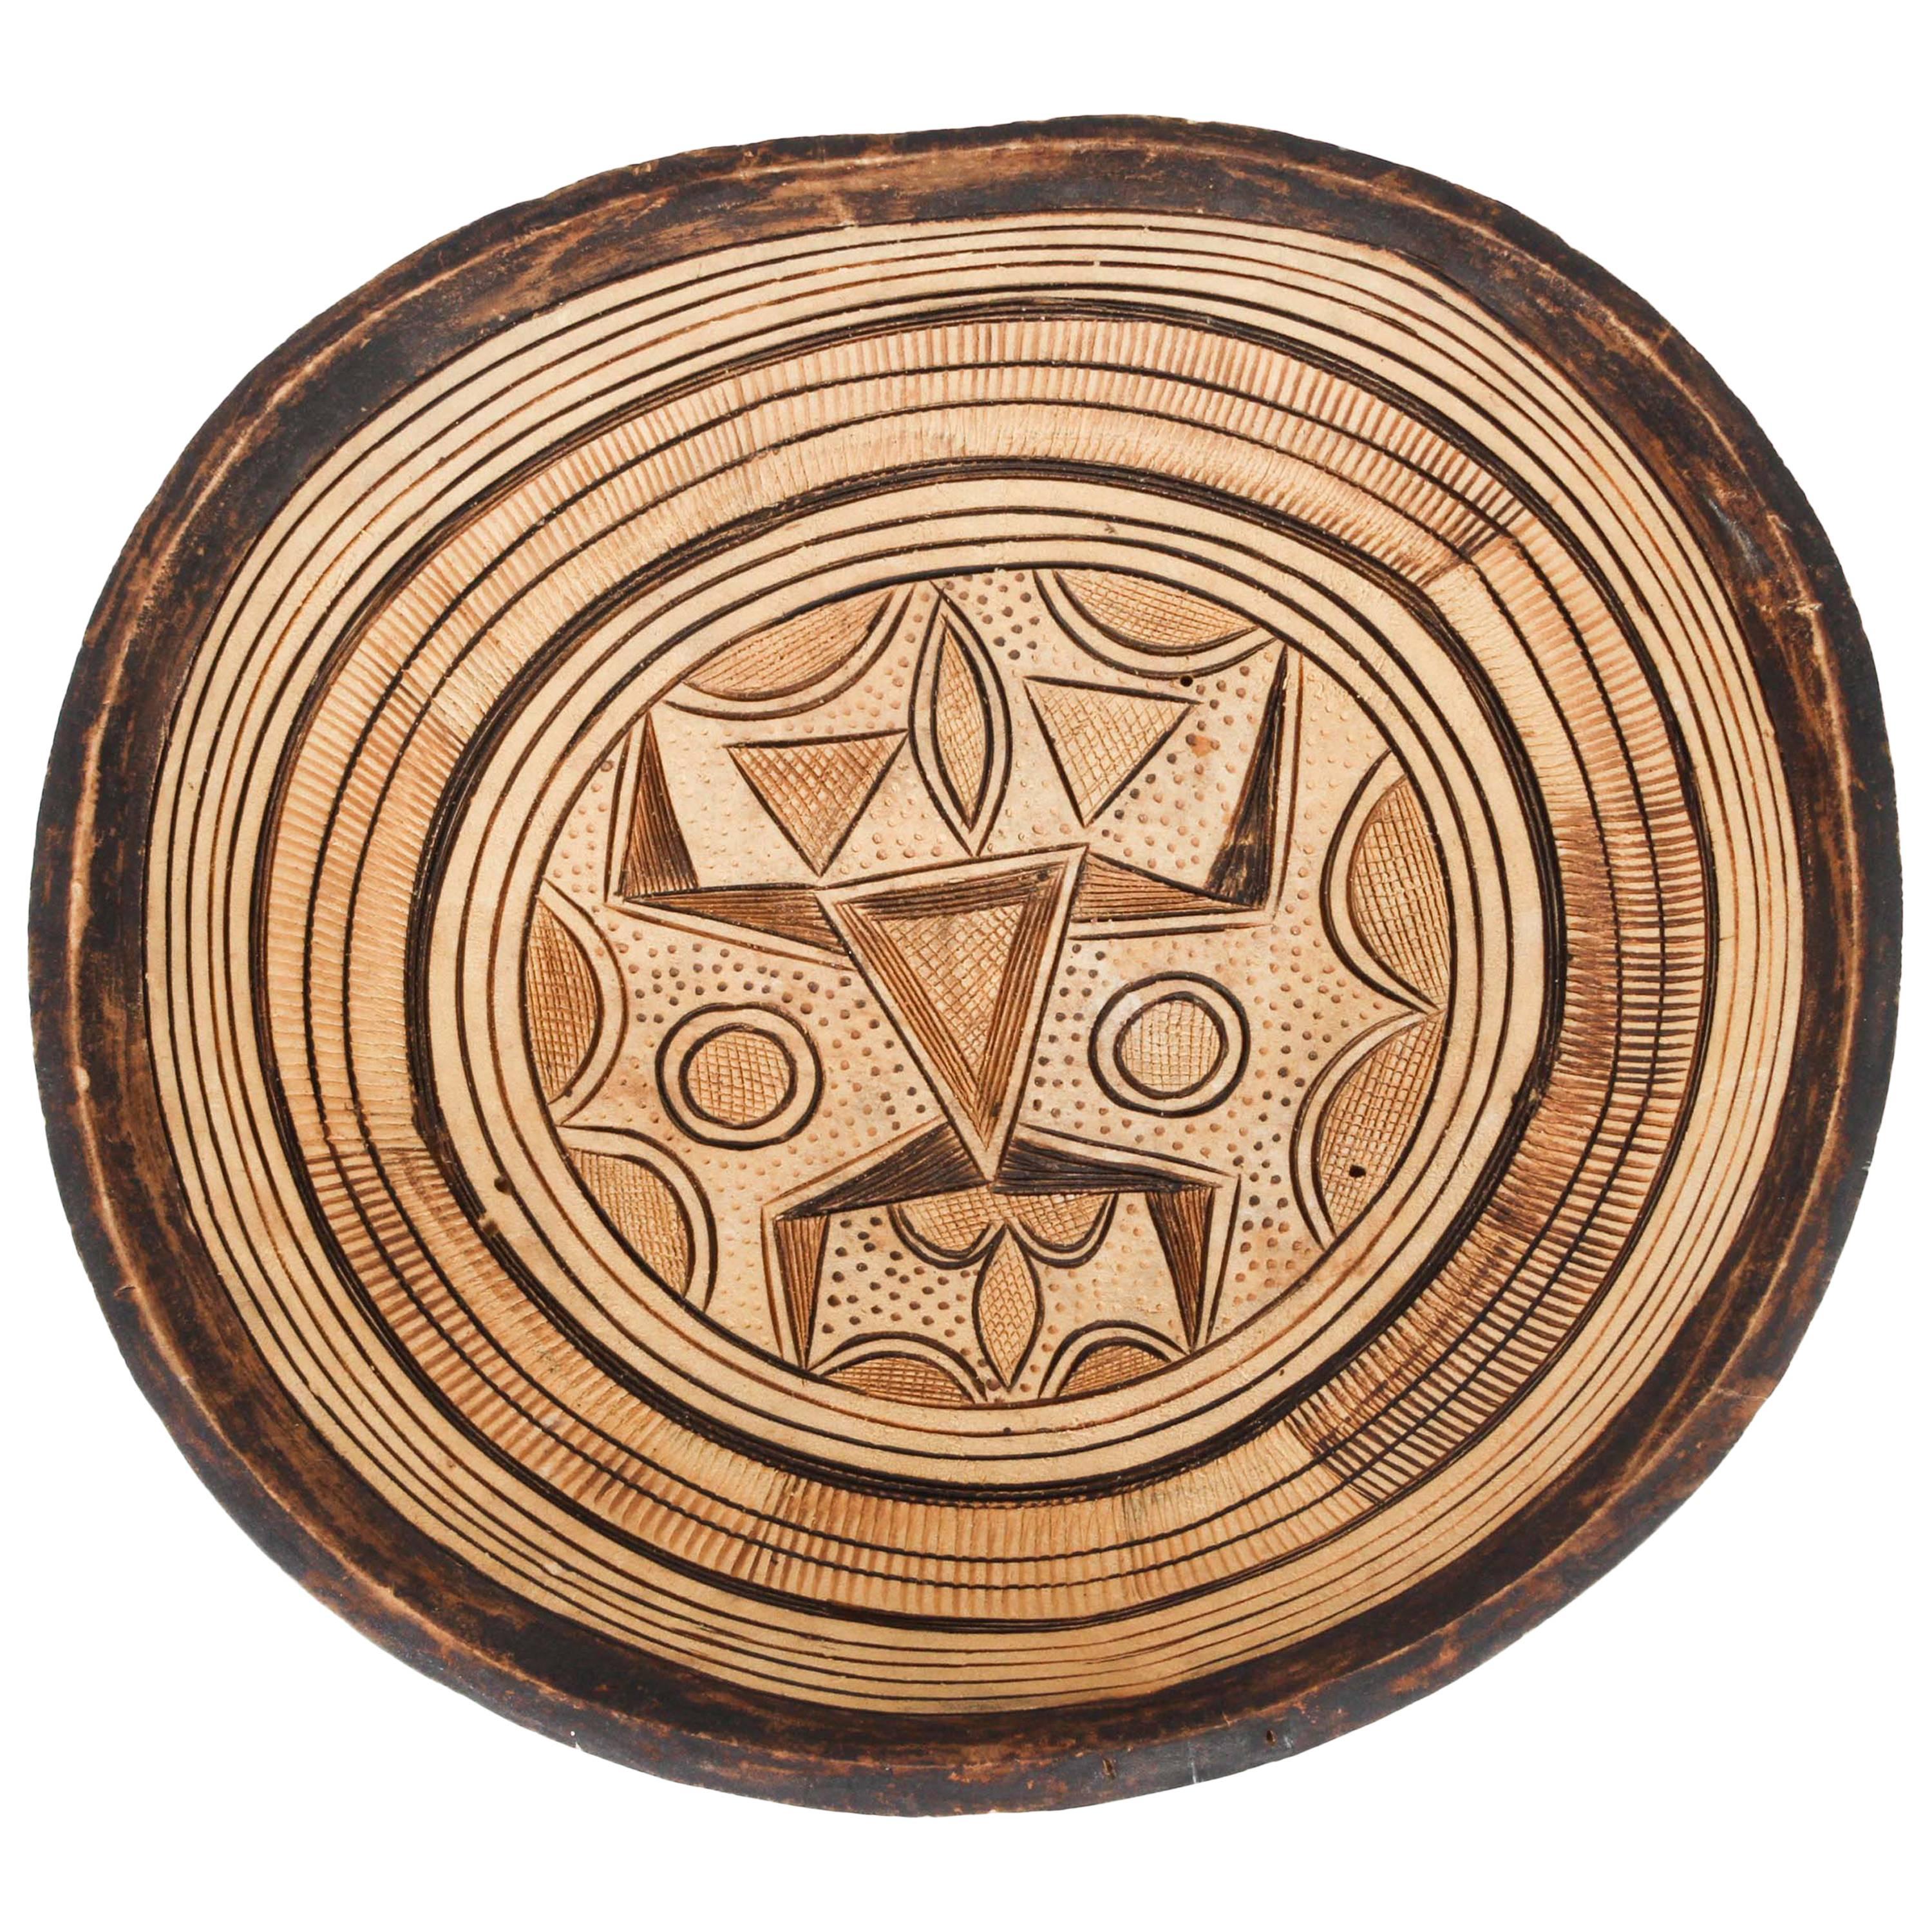 Hand-Carved West African Tribal Wooden Bowl